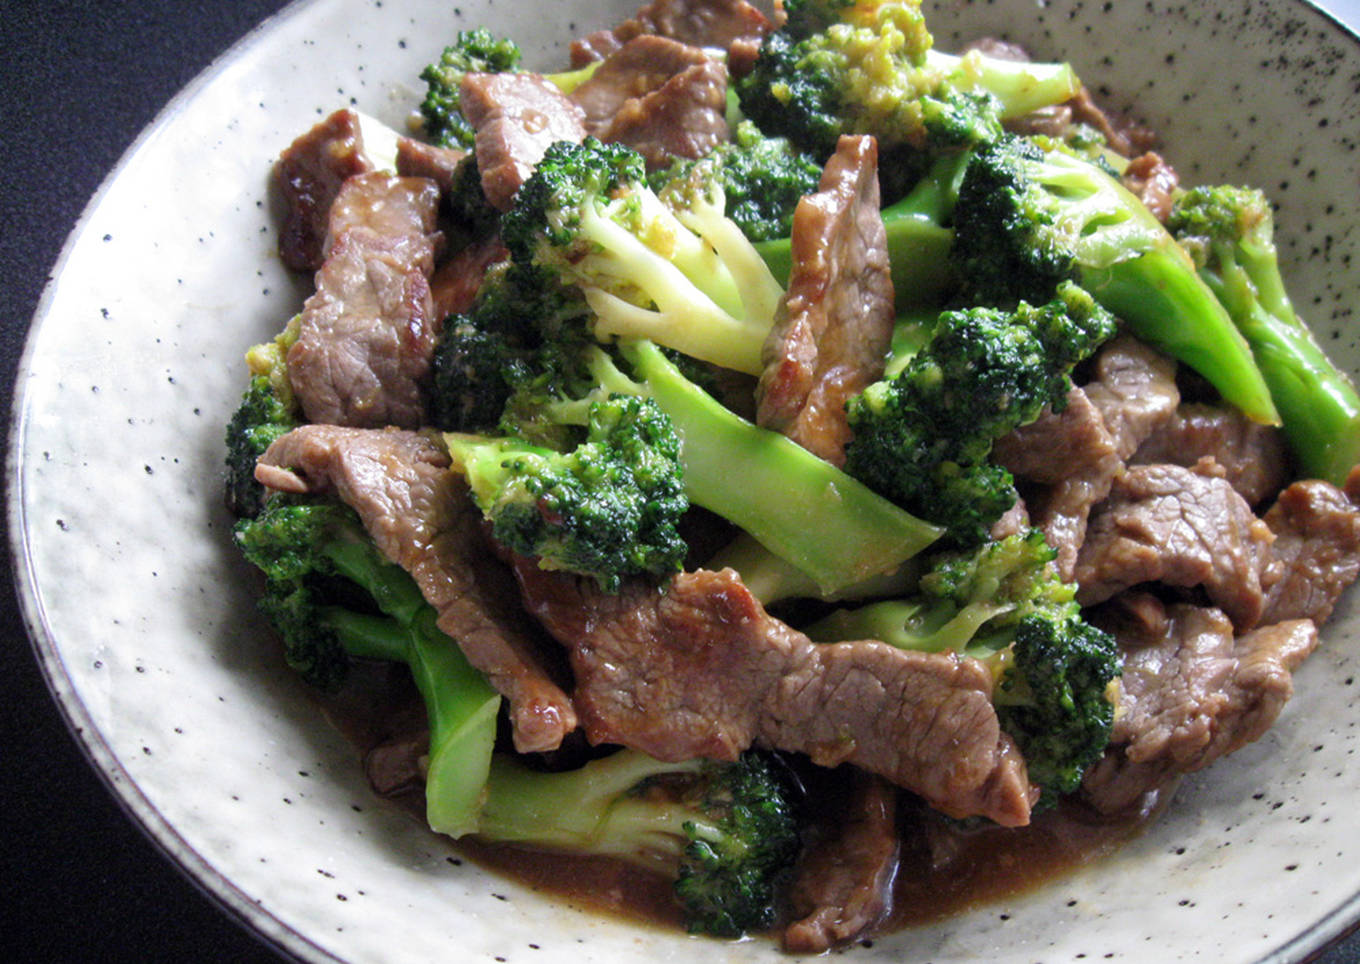 Stir-fried Beef & Broccoli with Oyster Sauce